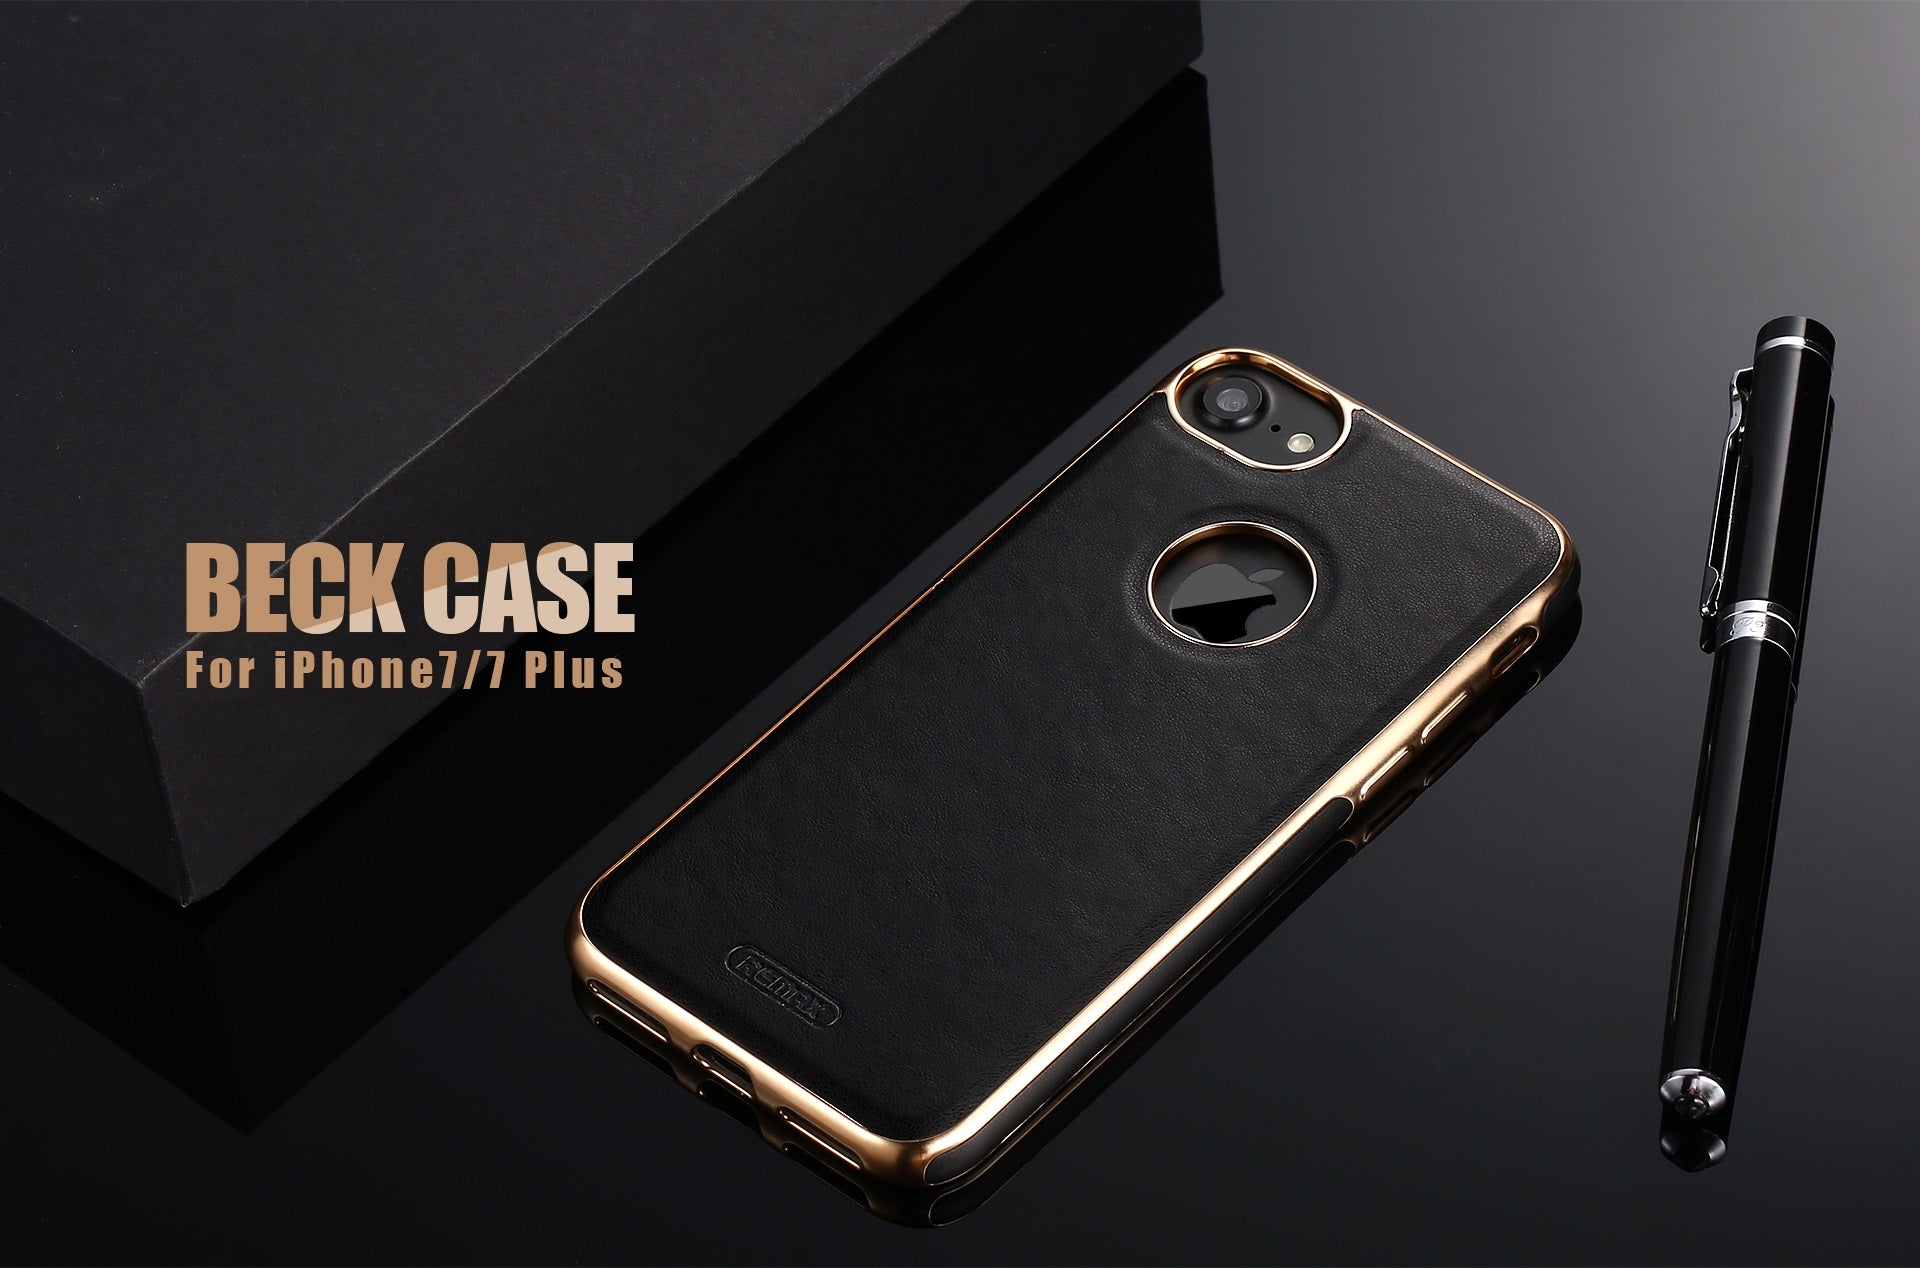 REMAX Official Store - Case Beck iPhone 7/7/Plus